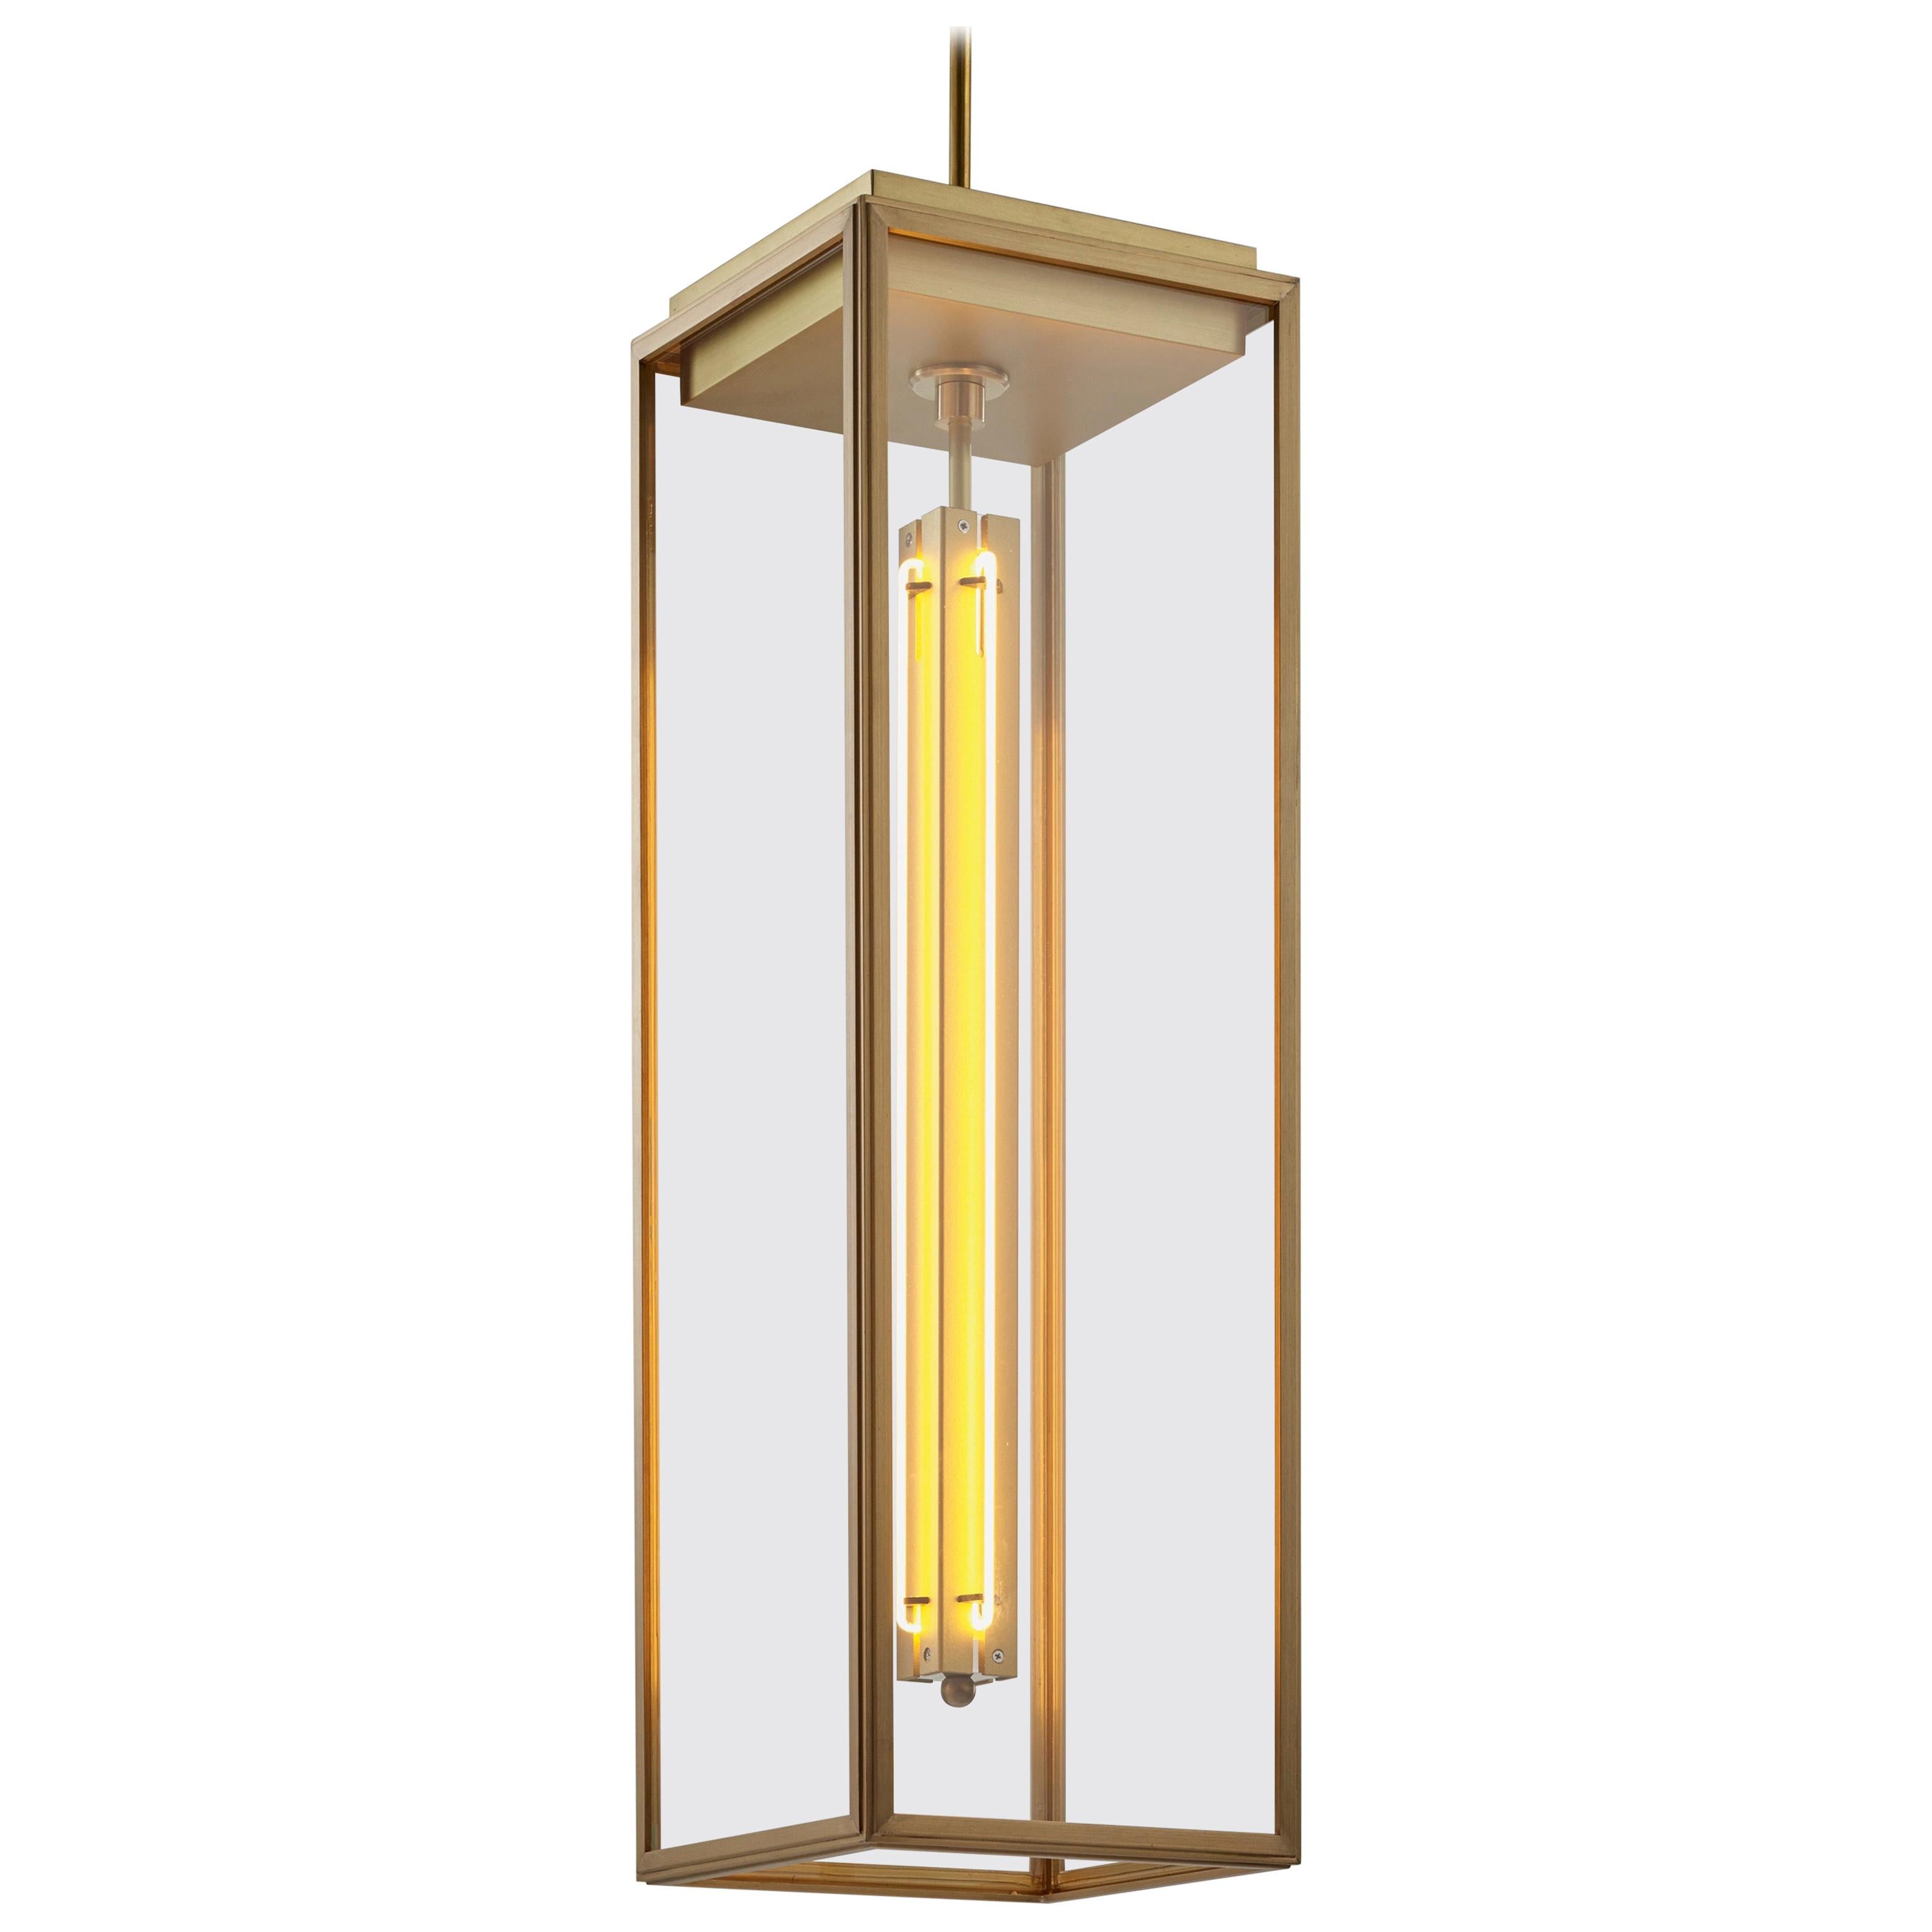 Tekna Ilford Pendant Extra Large Light with Sateen Brass Finish and Clear Glass